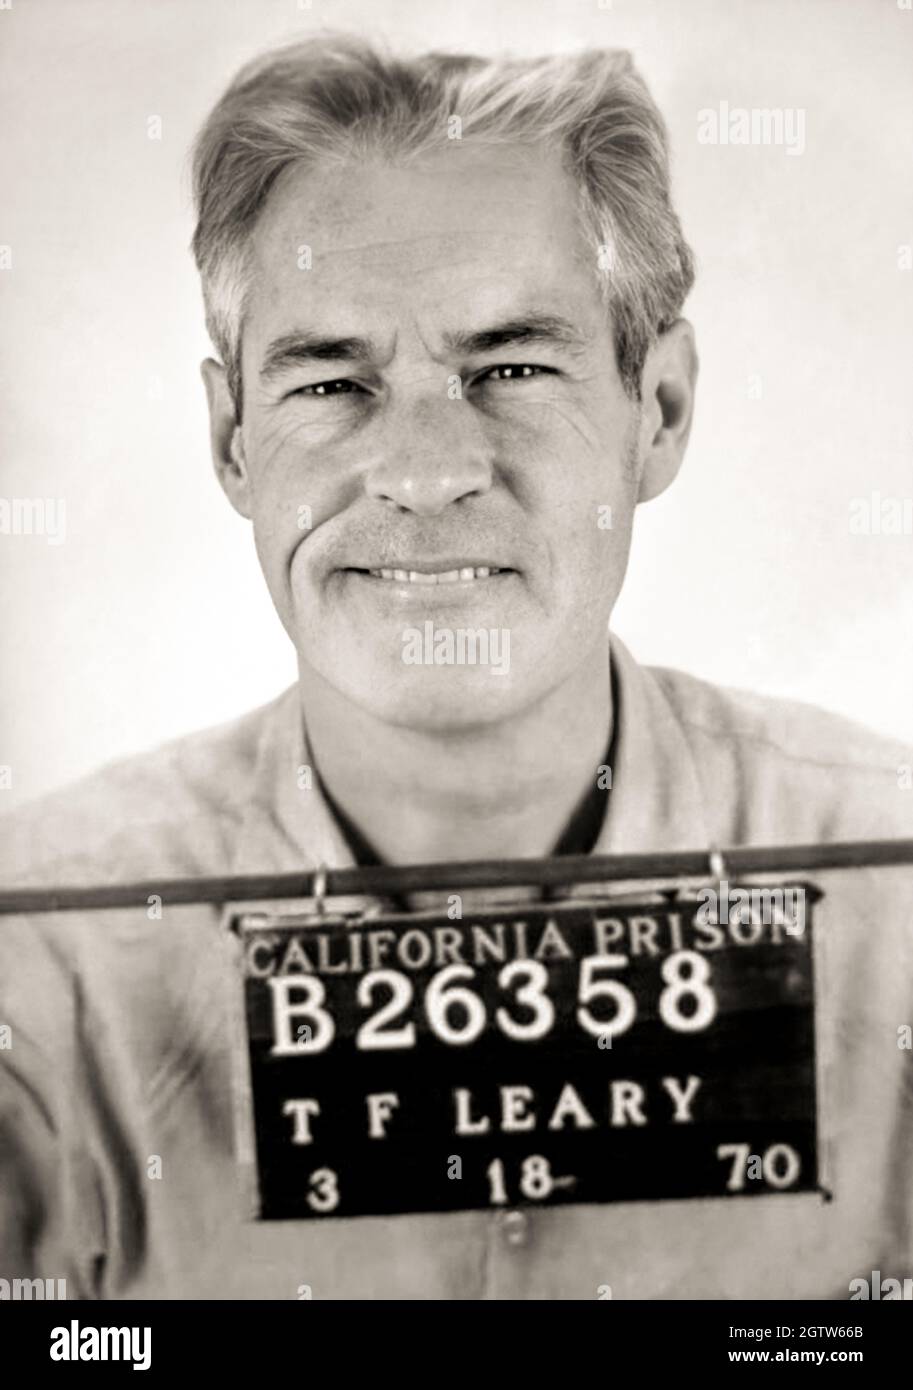 1970 , 18 march , California , USA :  Mug shot of  american psychologist , Hippy Guru and writer TIMOTHY LEARY ( 1920 - 1996 ), aged 50, arrested for the possession of  marijuana . He tested the therapeutic effects of lysergic acid diethylamide ( LSD ) and psilocybin . Unknown photographer by Police Department . - MUG-SHOT - MUGSHOT - FOTO SEGNALETICA - portrait - ritratto - smile - sorriso - PSICOLOGO - PSICOLOGIA - PSICOLOGY - ACIDO LISERGICO - LSD - DROGA - DROGHE - DROUGS - PSICHEDELIA - PSICHEDELICO - HIPPY - TOSSICODIPENDENZA - PORTRAIT - RITRATTO - FOTO STORICHE - HISTORY - LETTERATURA Stock Photo